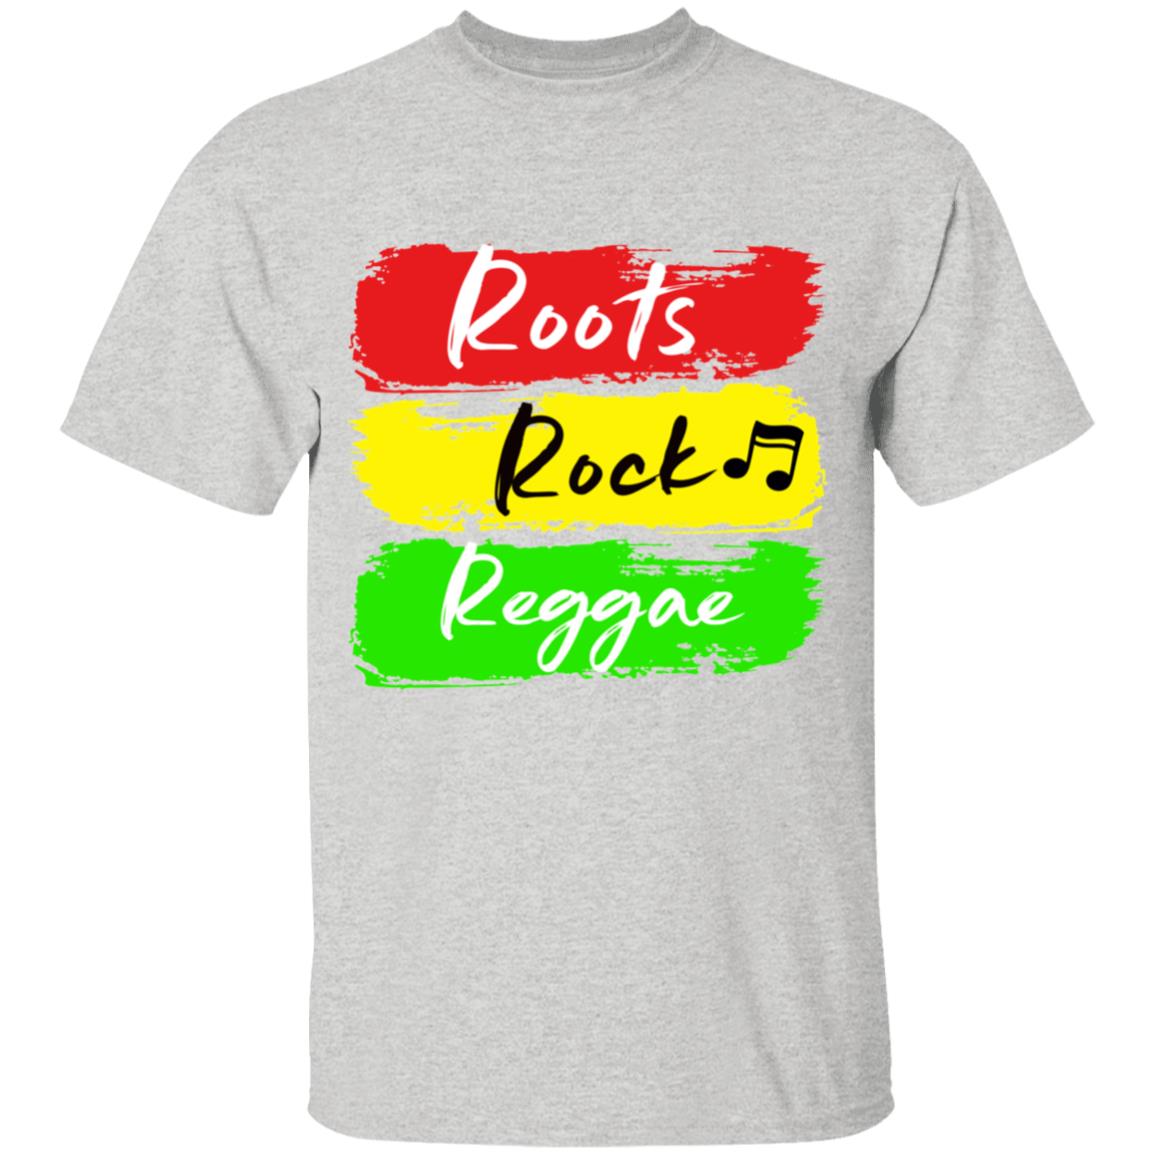 Roots Rock Reggae Youth T-Shirt